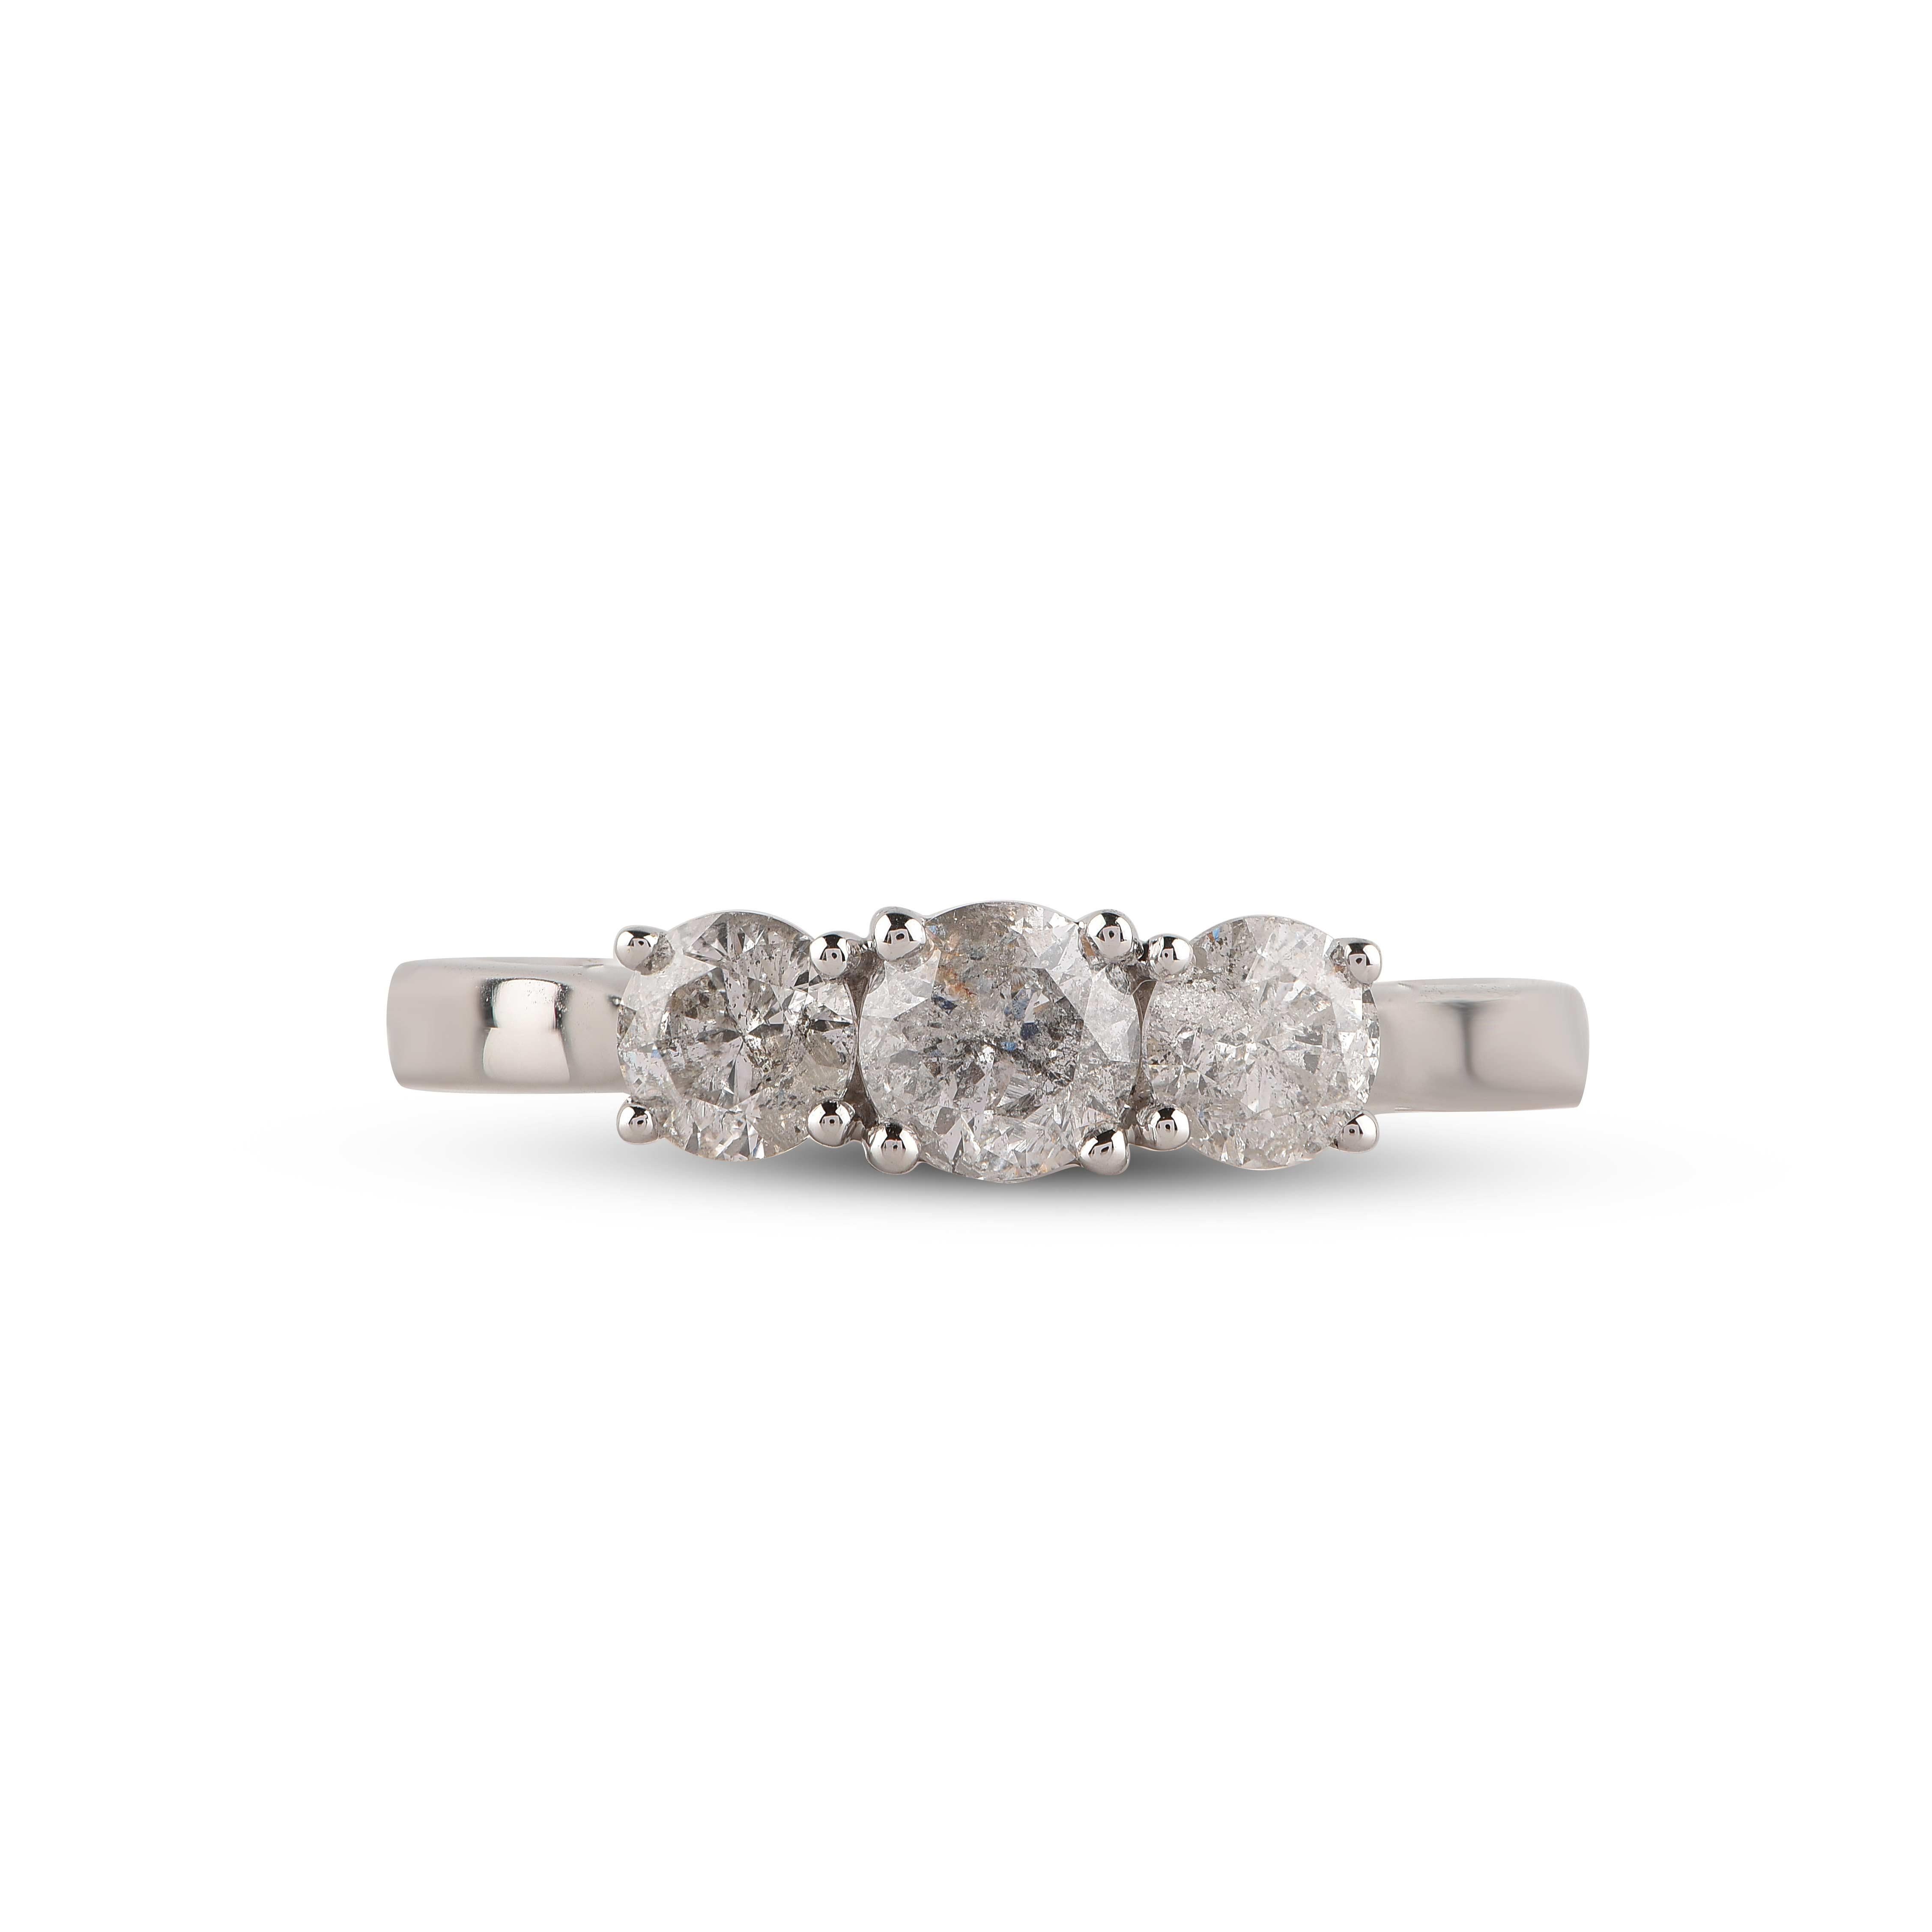 This elegant diamond ring shines bright with 3 brilliant-cut diamonds set in prong setting and handcrafted in 14-karat white gold. The diamonds are graded H-I Color, I2 Clarity.  

Metal color and ring size can be customized on request. 

This piece